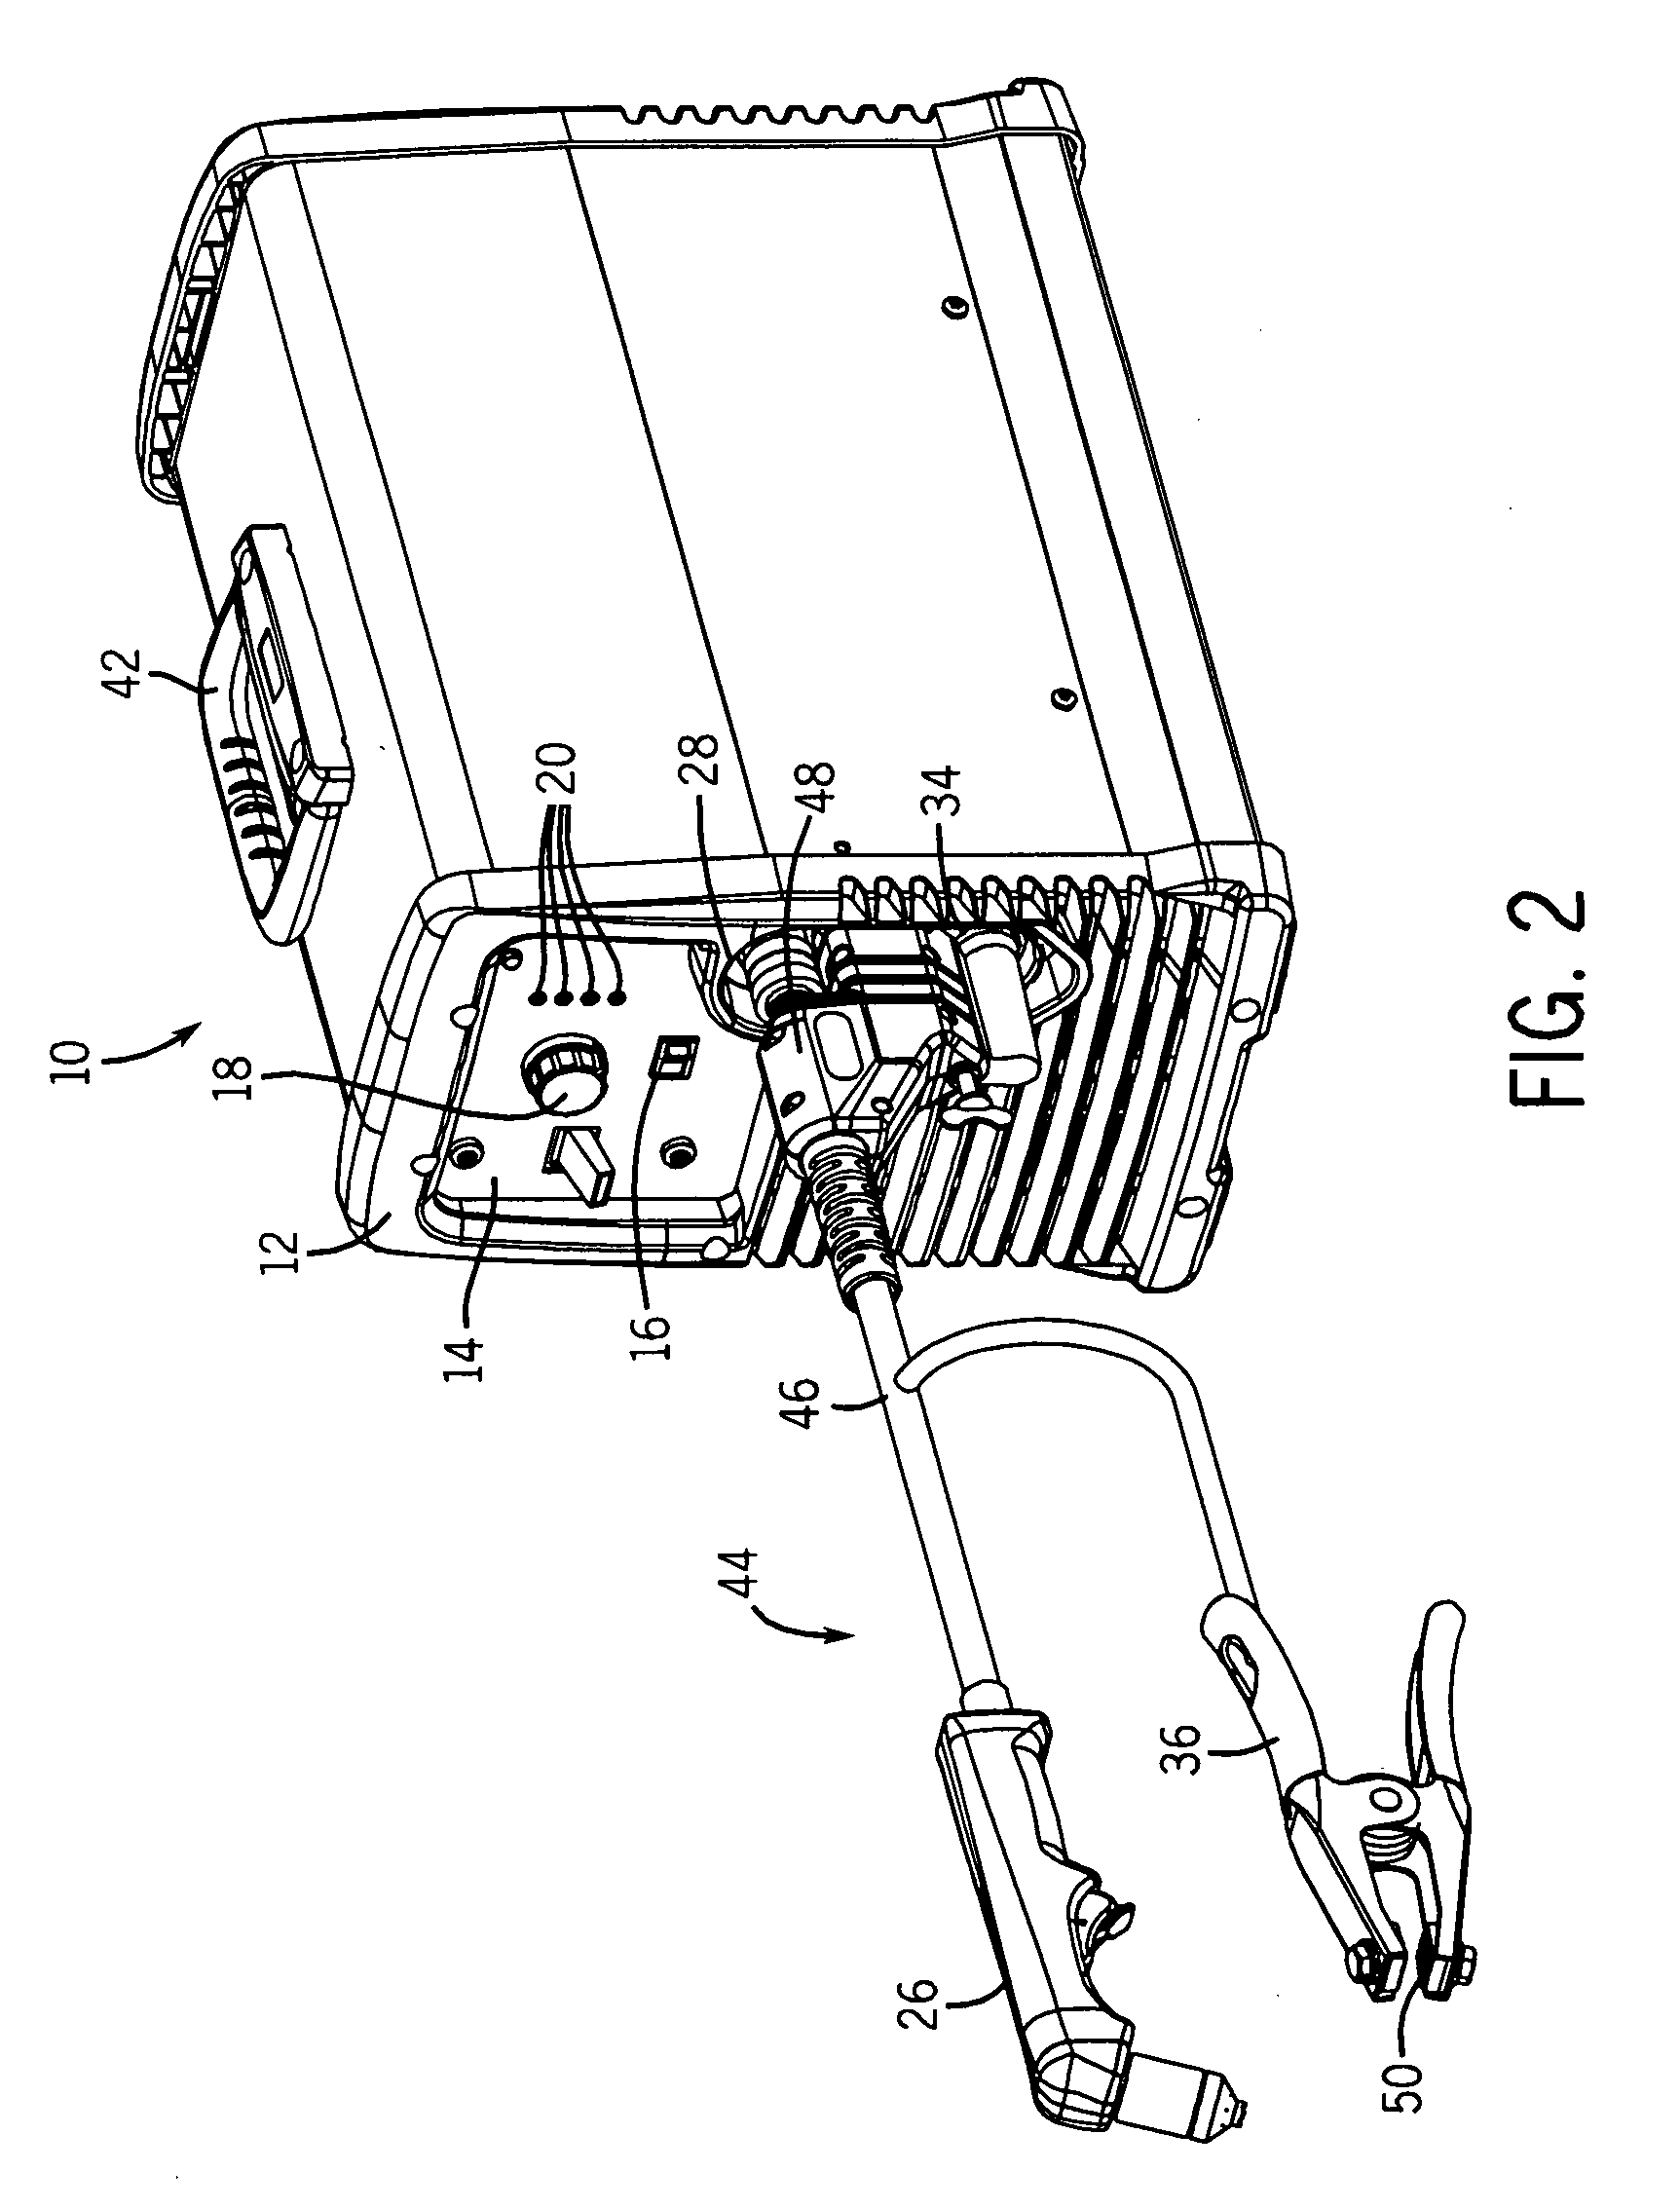 Plasma cutter with disconnectable torch and work assemblies